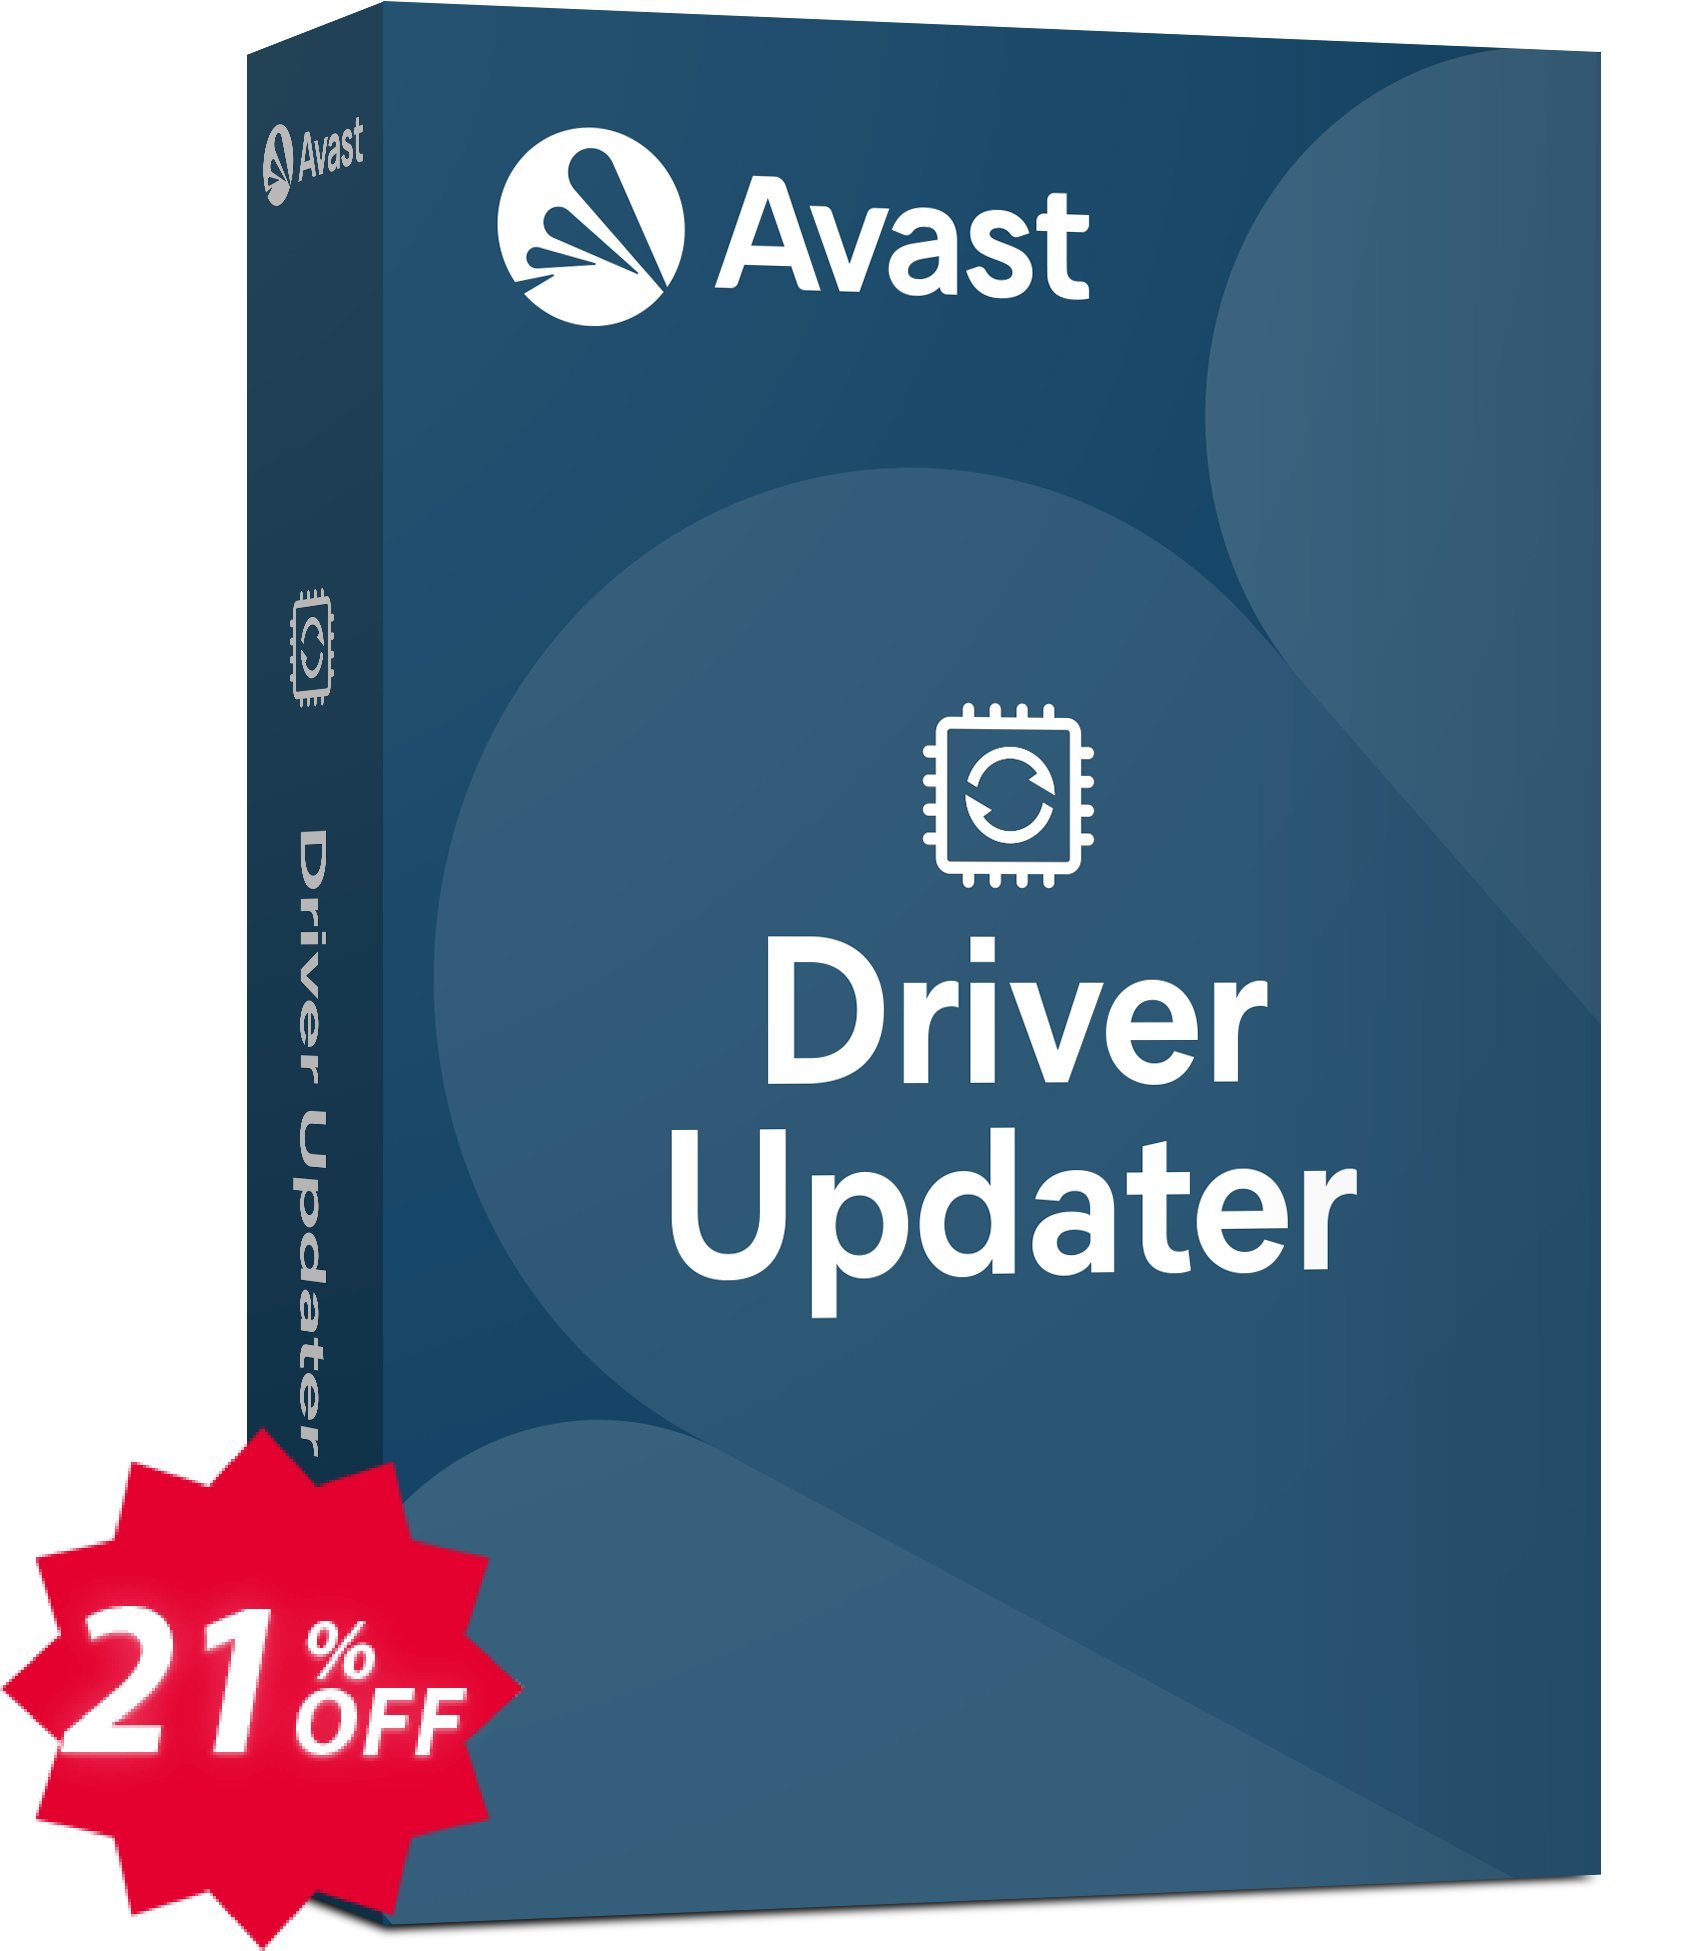 Avast Driver Updater Coupon code 21% discount 